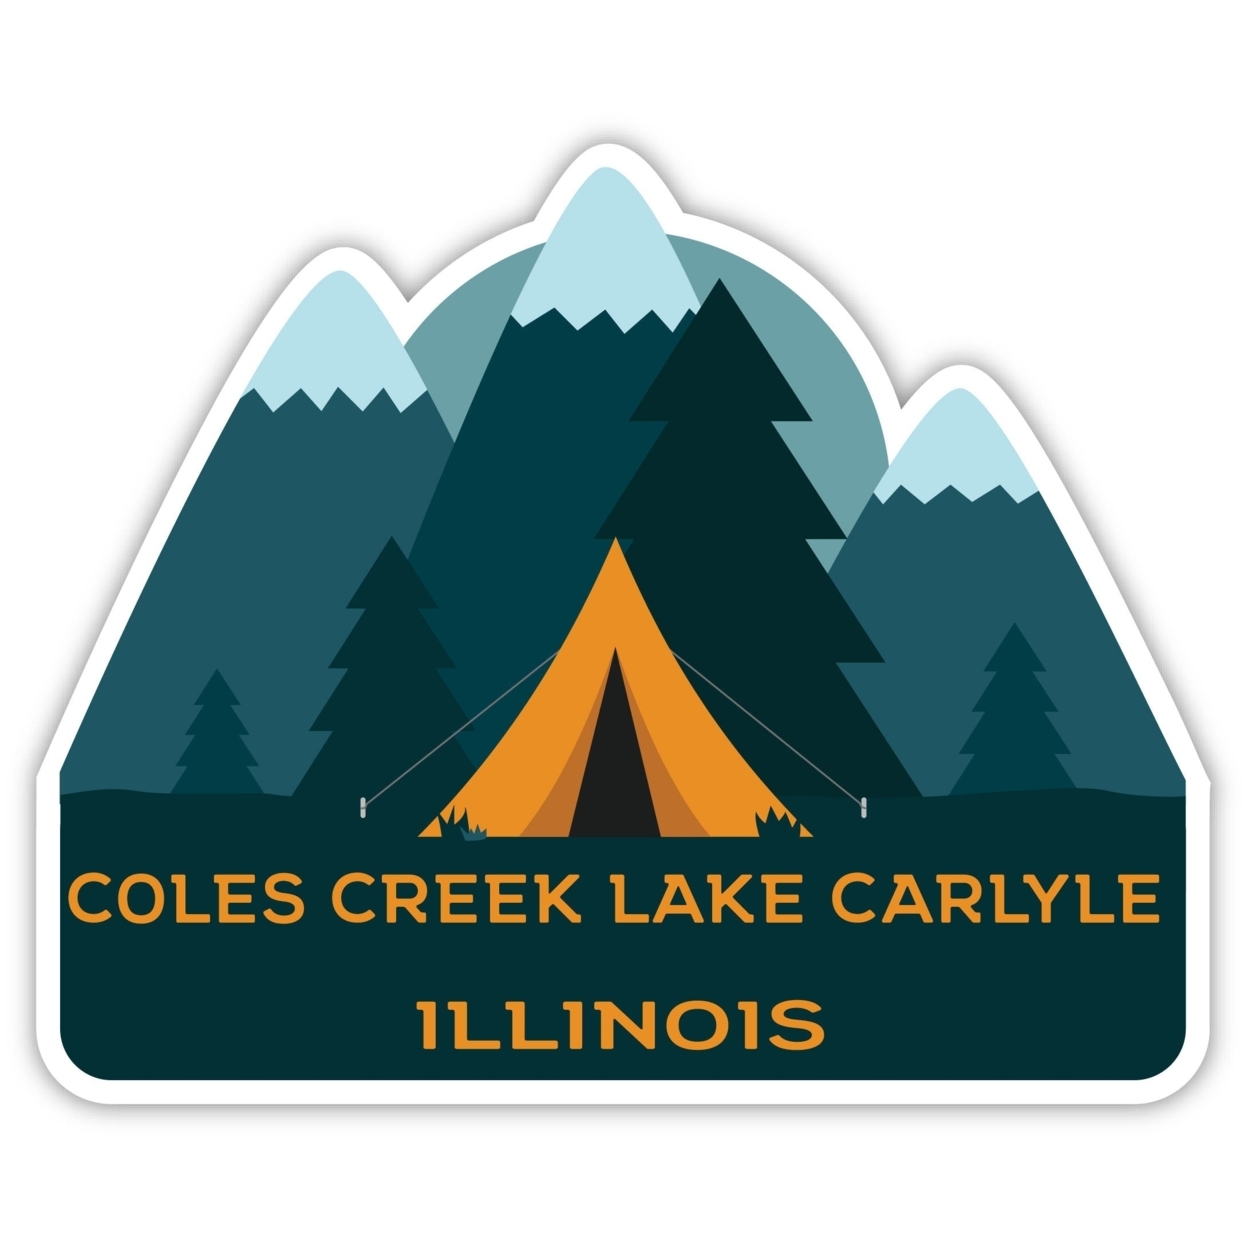 Coles Creek Lake Carlyle Illinois Souvenir Decorative Stickers (Choose Theme And Size) - 4-Pack, 2-Inch, Tent